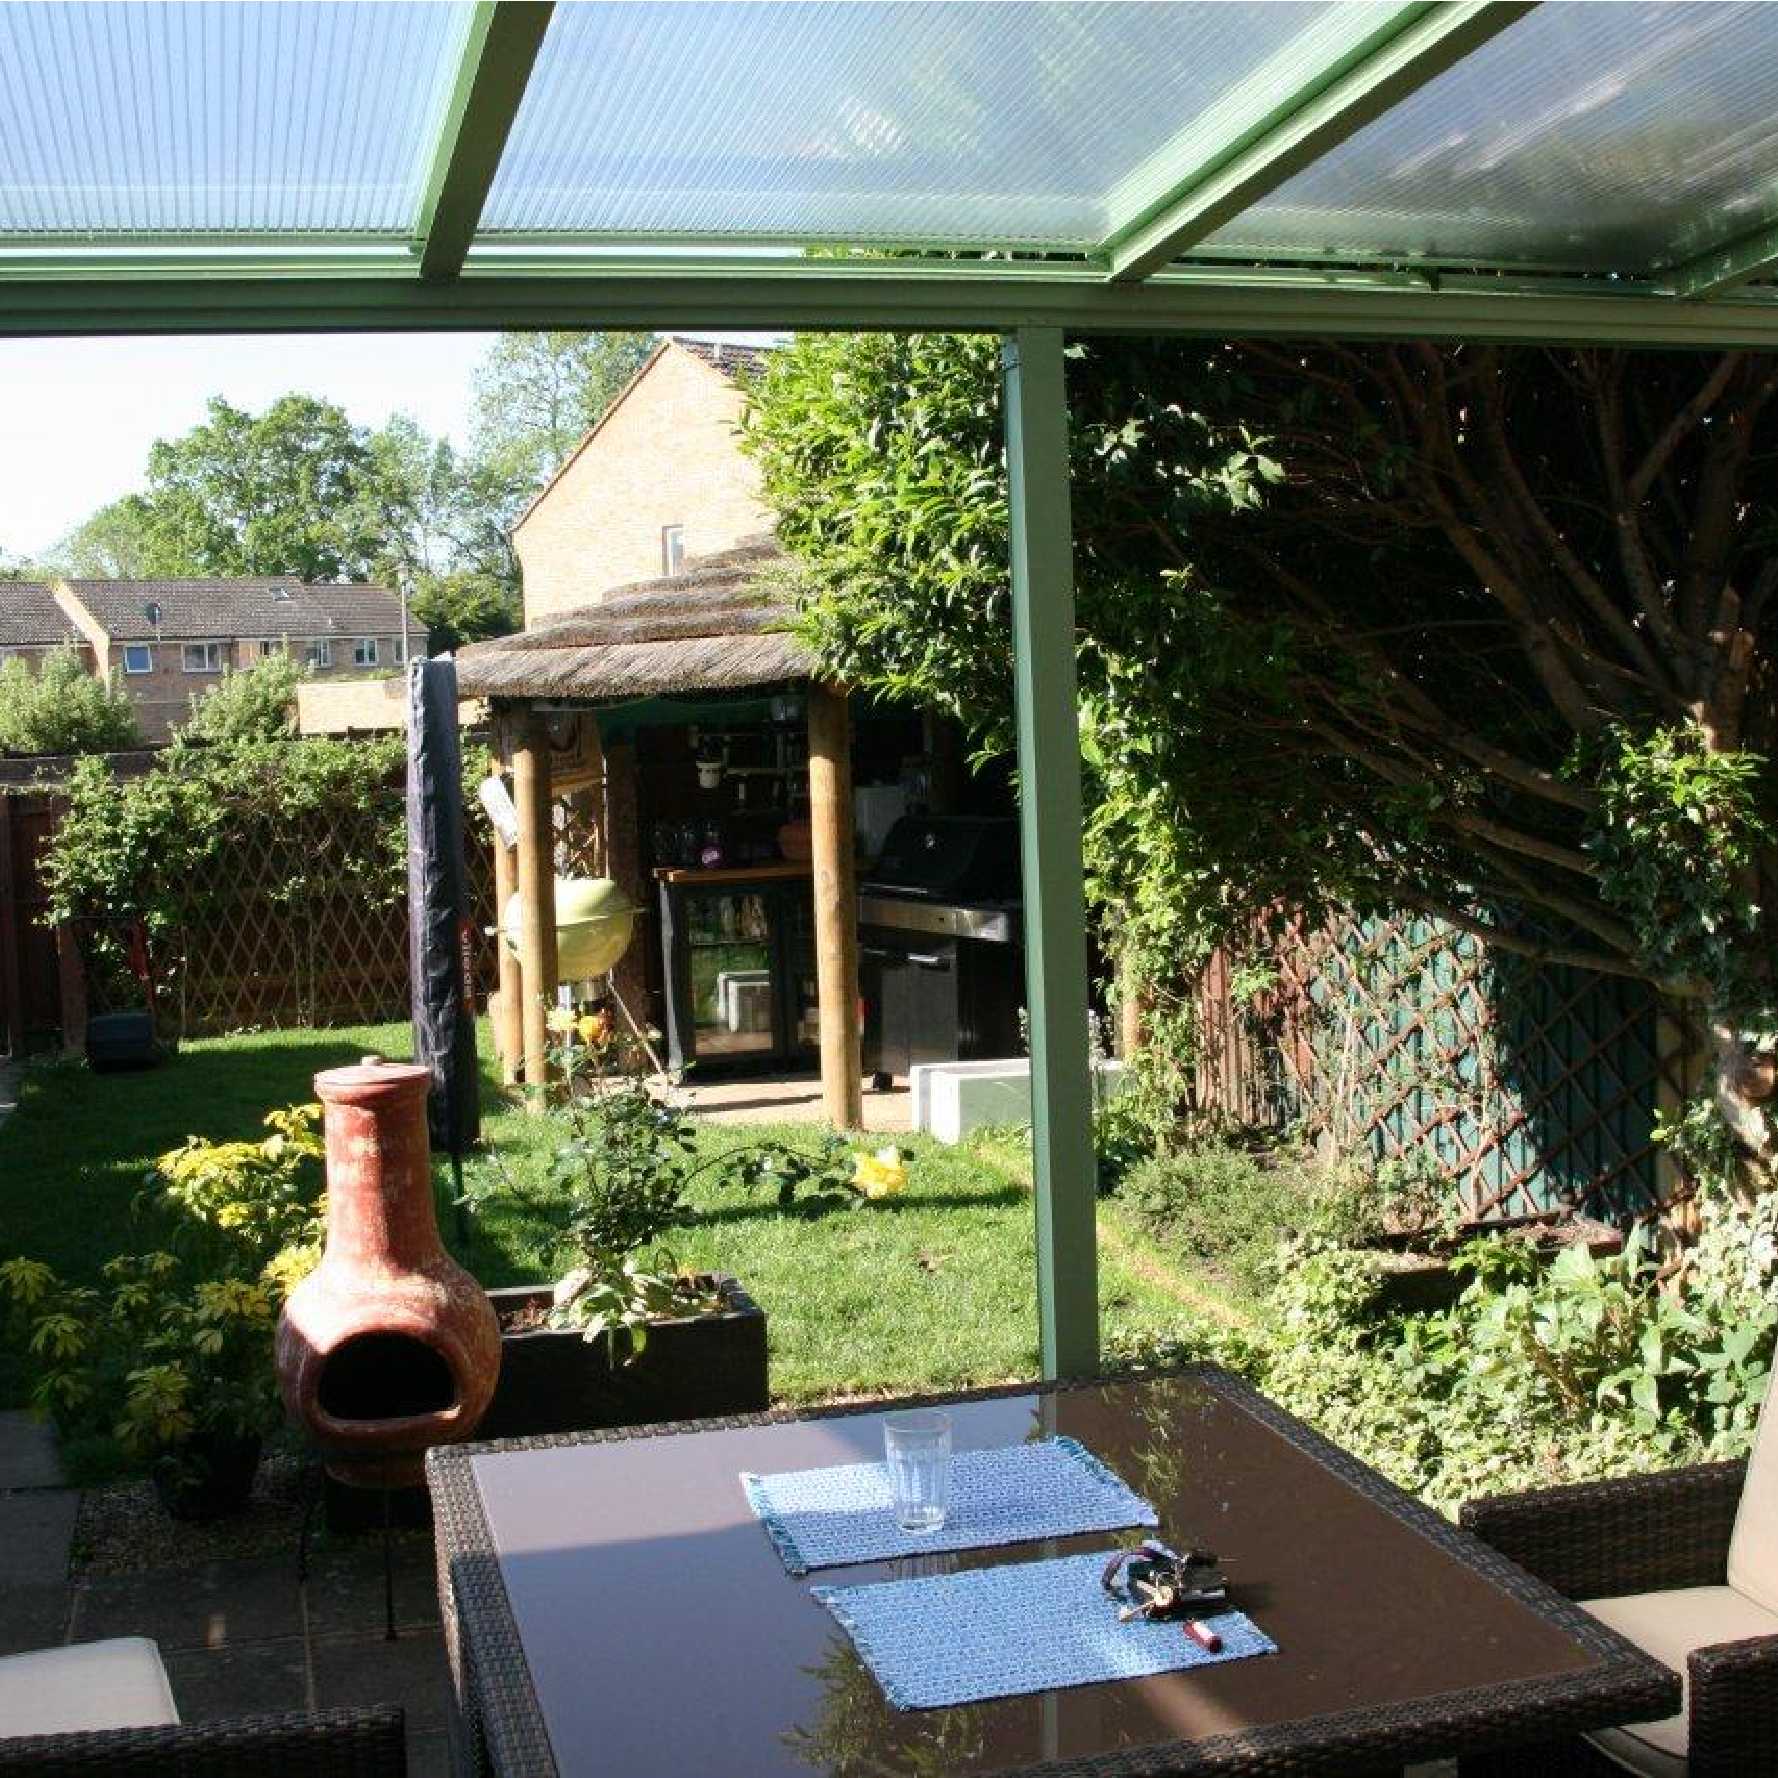 Affordable Omega Smart Lean-To Canopy, White with 16mm Polycarbonate Glazing - 7.4m (W) x 2.5m (P), (4) Supporting Posts